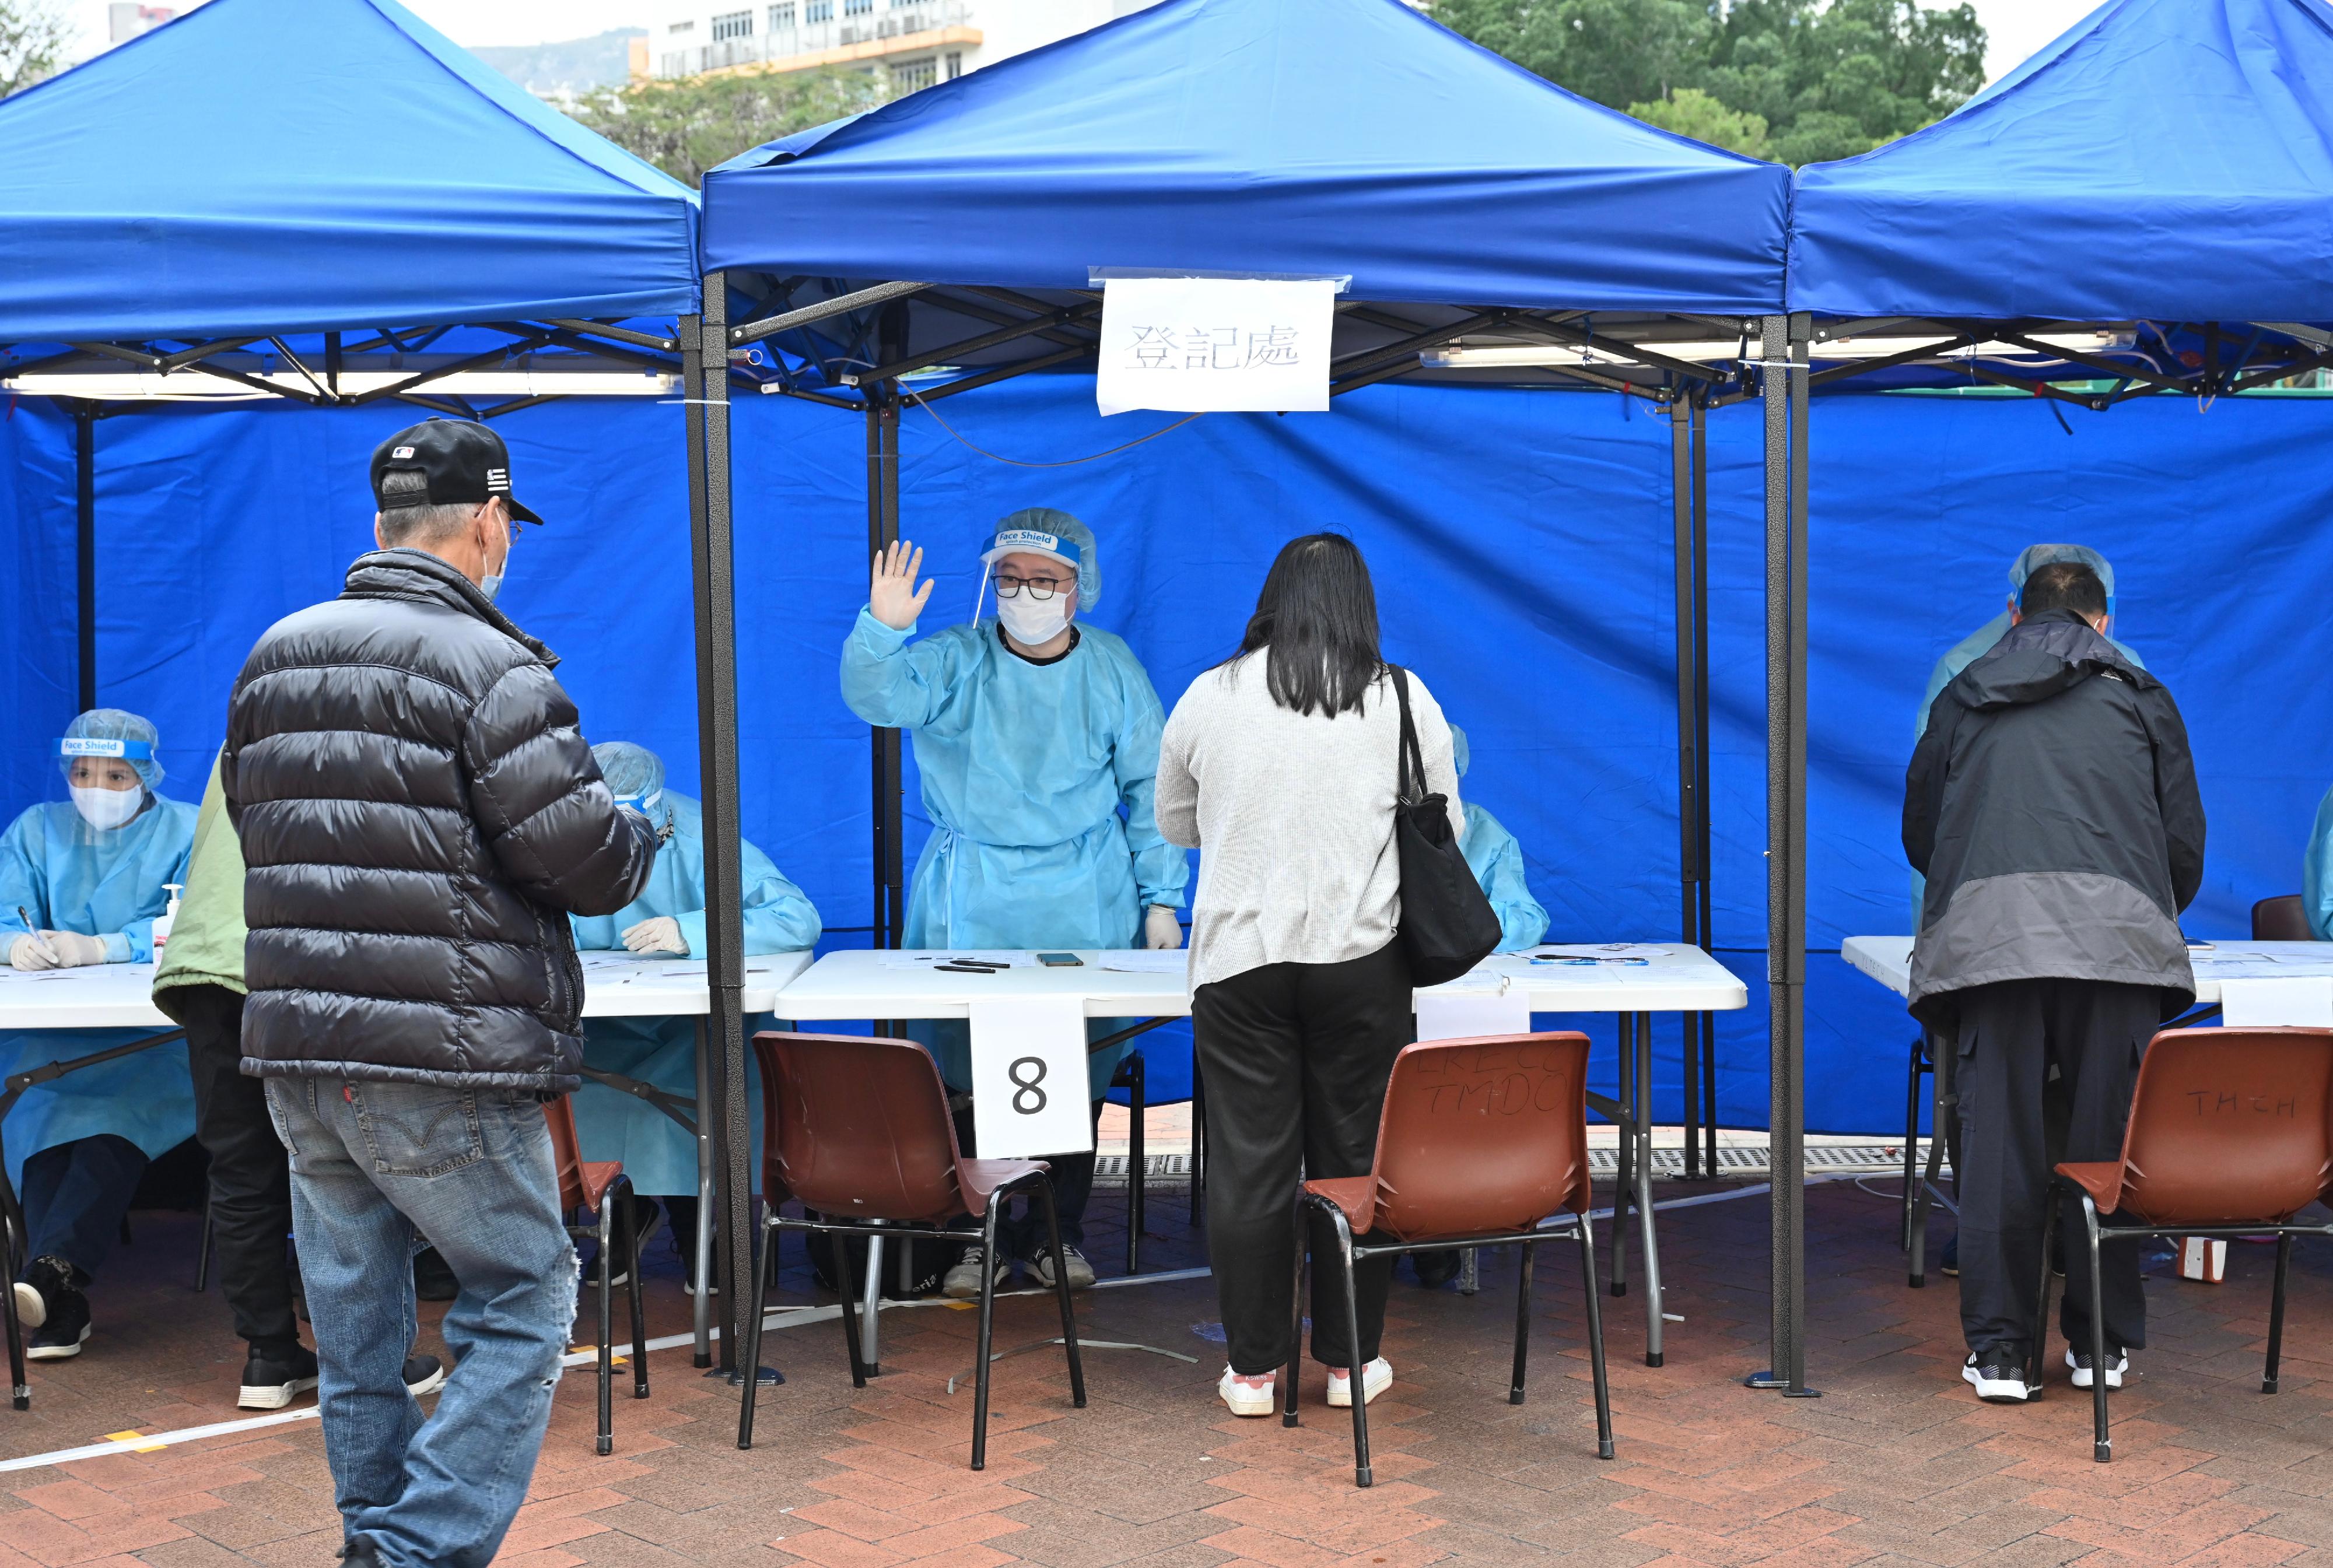 The Government yesterday (February 5) made a "restriction-testing declaration" and issued a compulsory testing notice in respect of the specified "restricted area" in Tai Hing Estate, Tuen Mun, under which people within the specified "restricted area" in Tai Hing Estate, Tuen Mun, were required to stay in their premises and undergo compulsory testing. Photo shows staff members of the Housing Department checking whether persons in the "restricted area" have undergone compulsory testing in the enforcement operation.